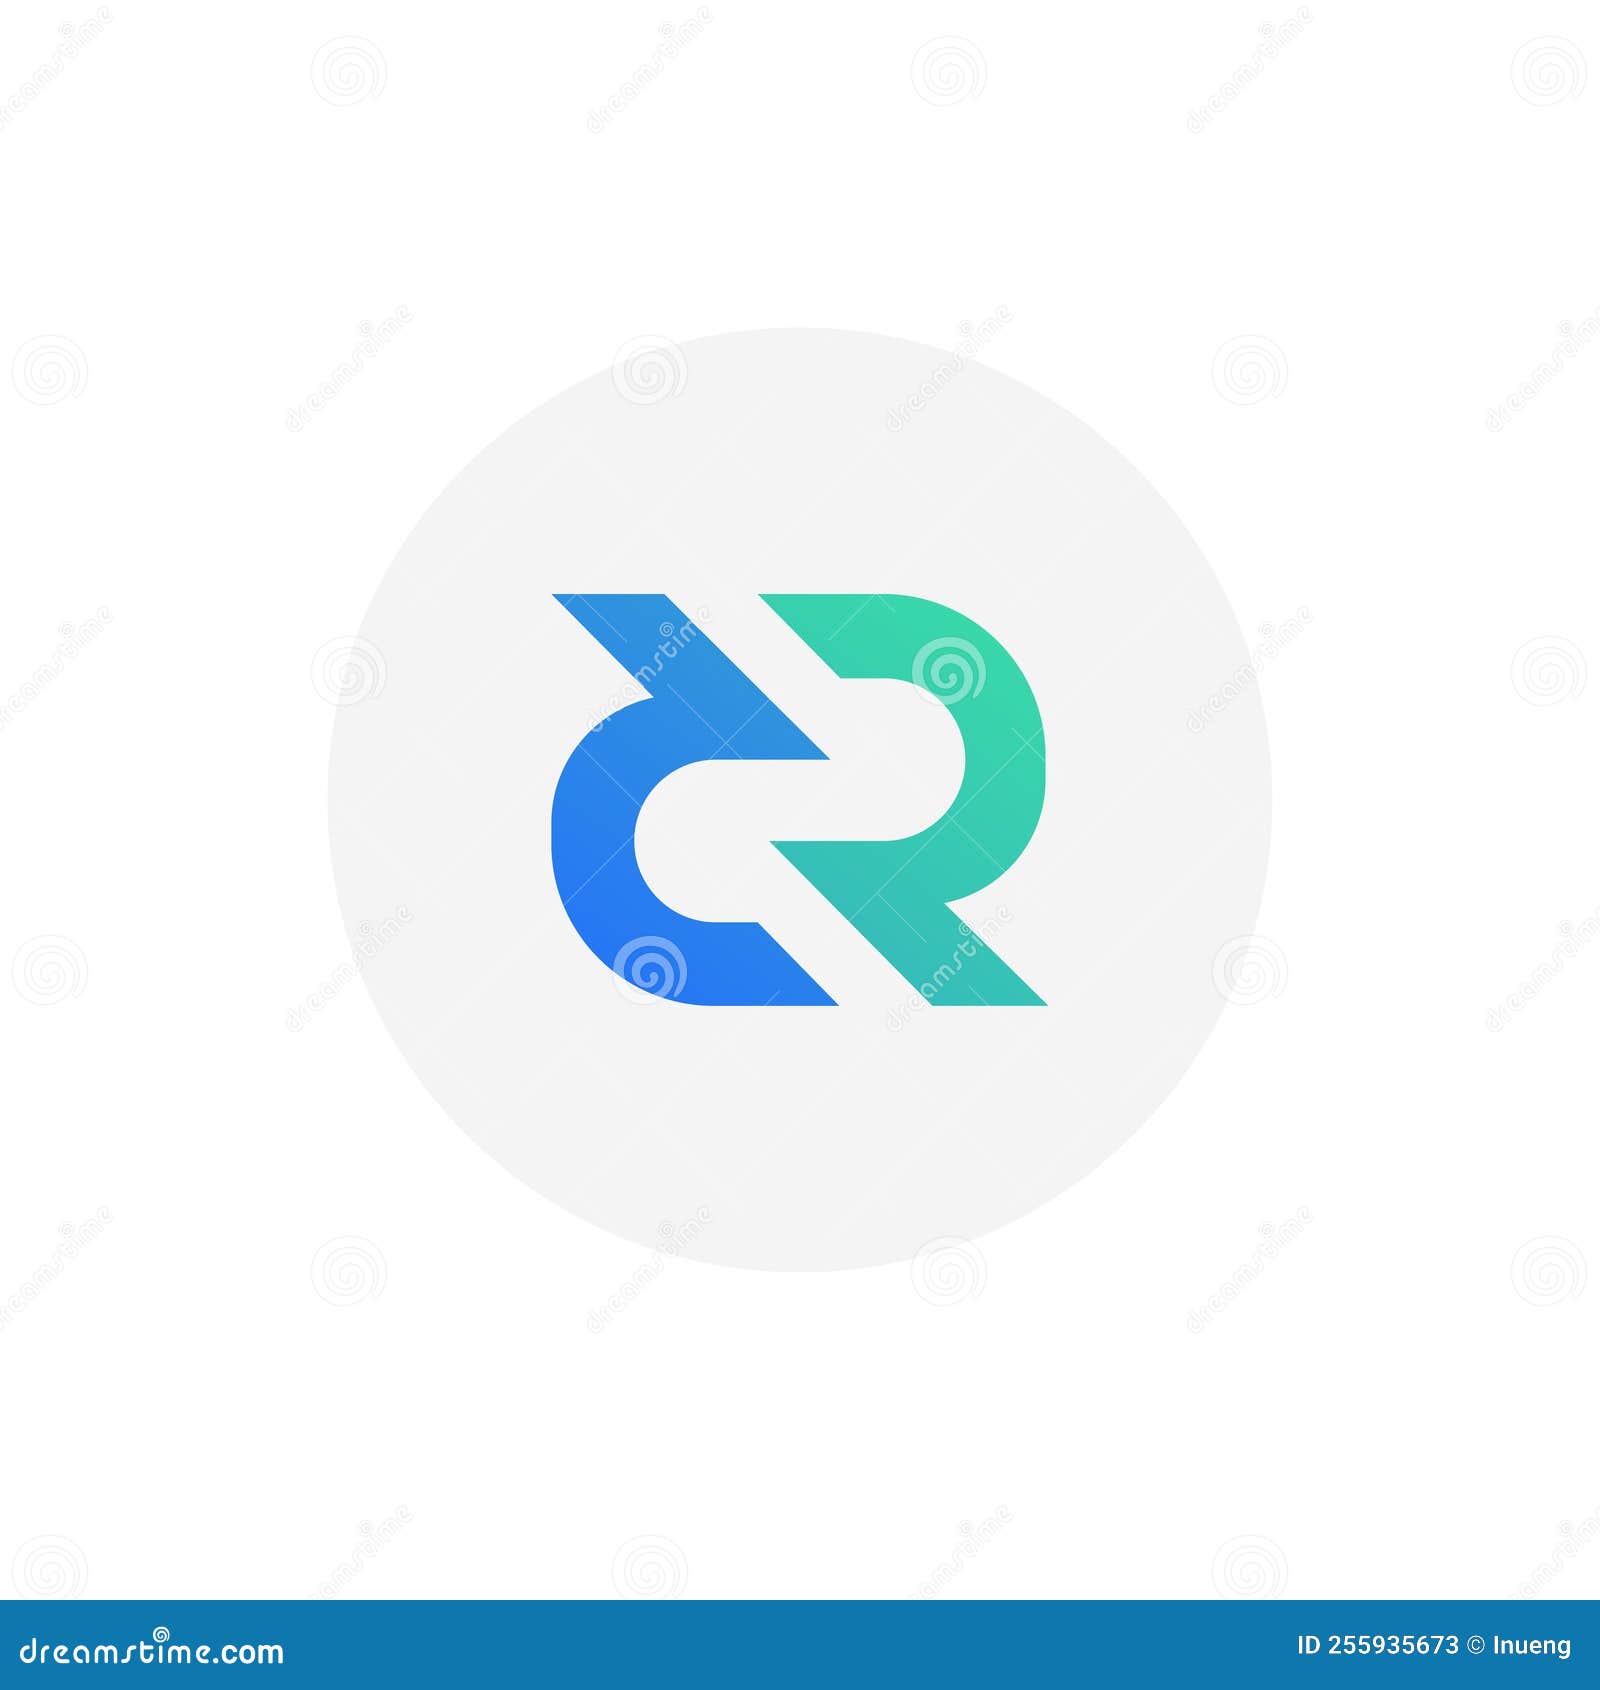 decred dcr coin icon  on white background